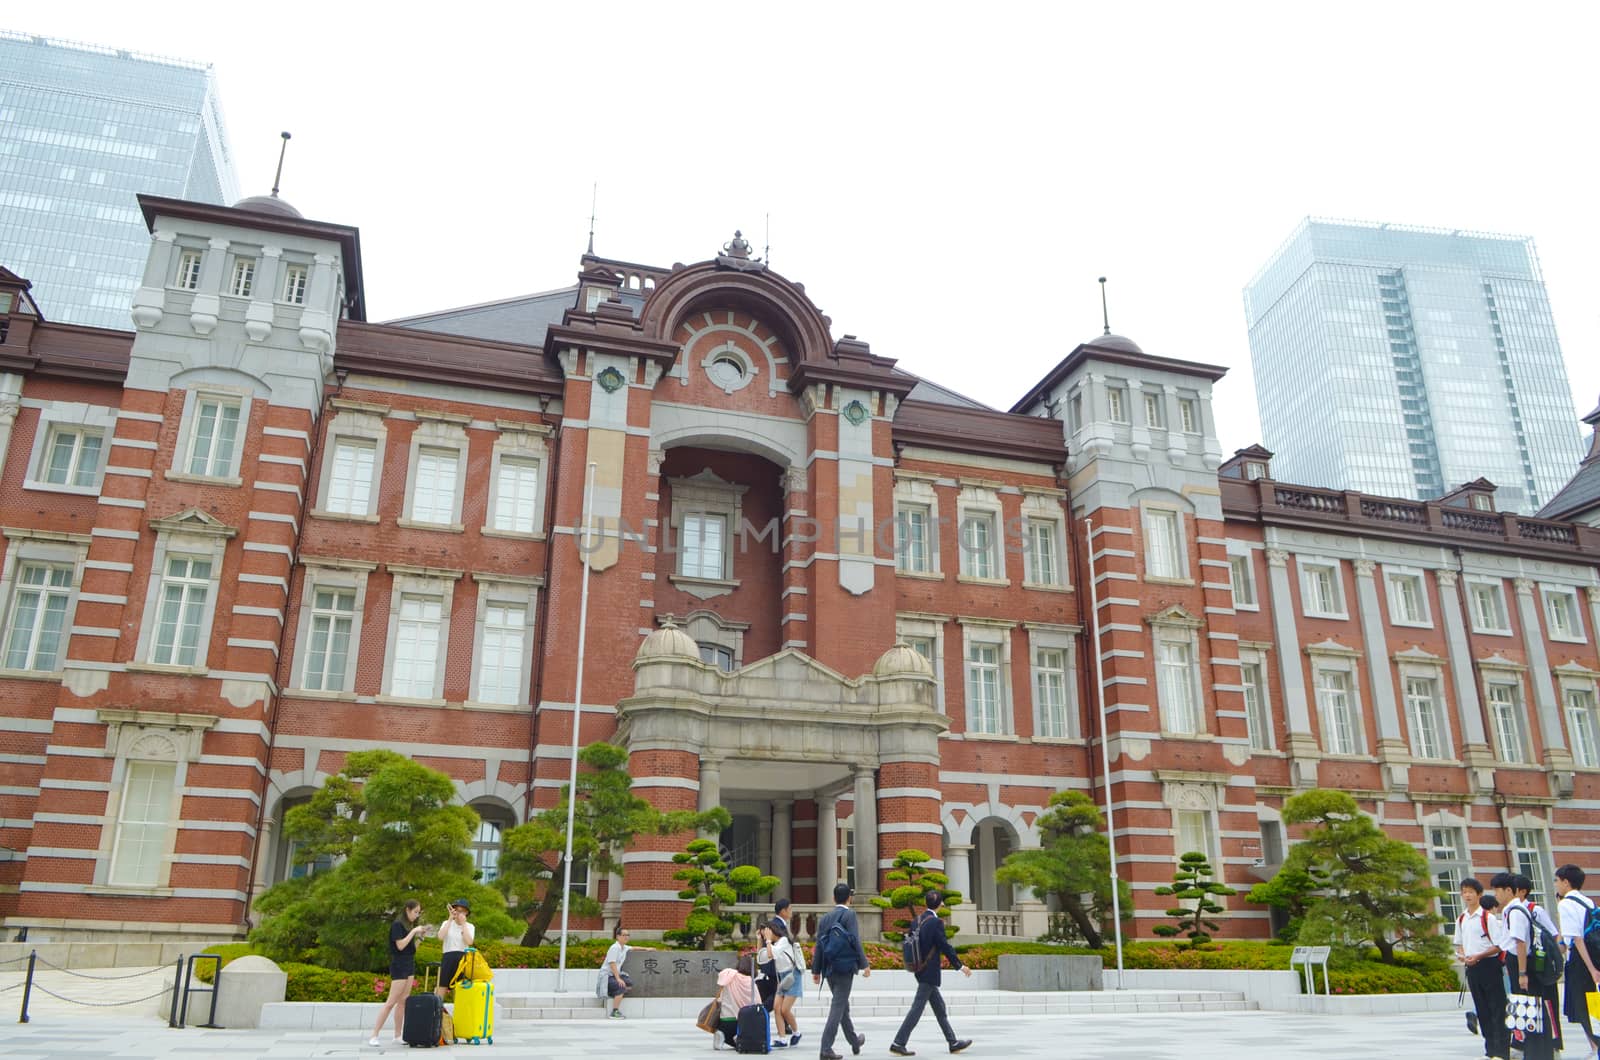 TOKYO, JAPAN - MAY 30, 2018 : People passing the Marunouchi Station Building at Tokyo Station, Tokyo Station is the main intercity rail terminal in Tokyo and busiest station in Japan.